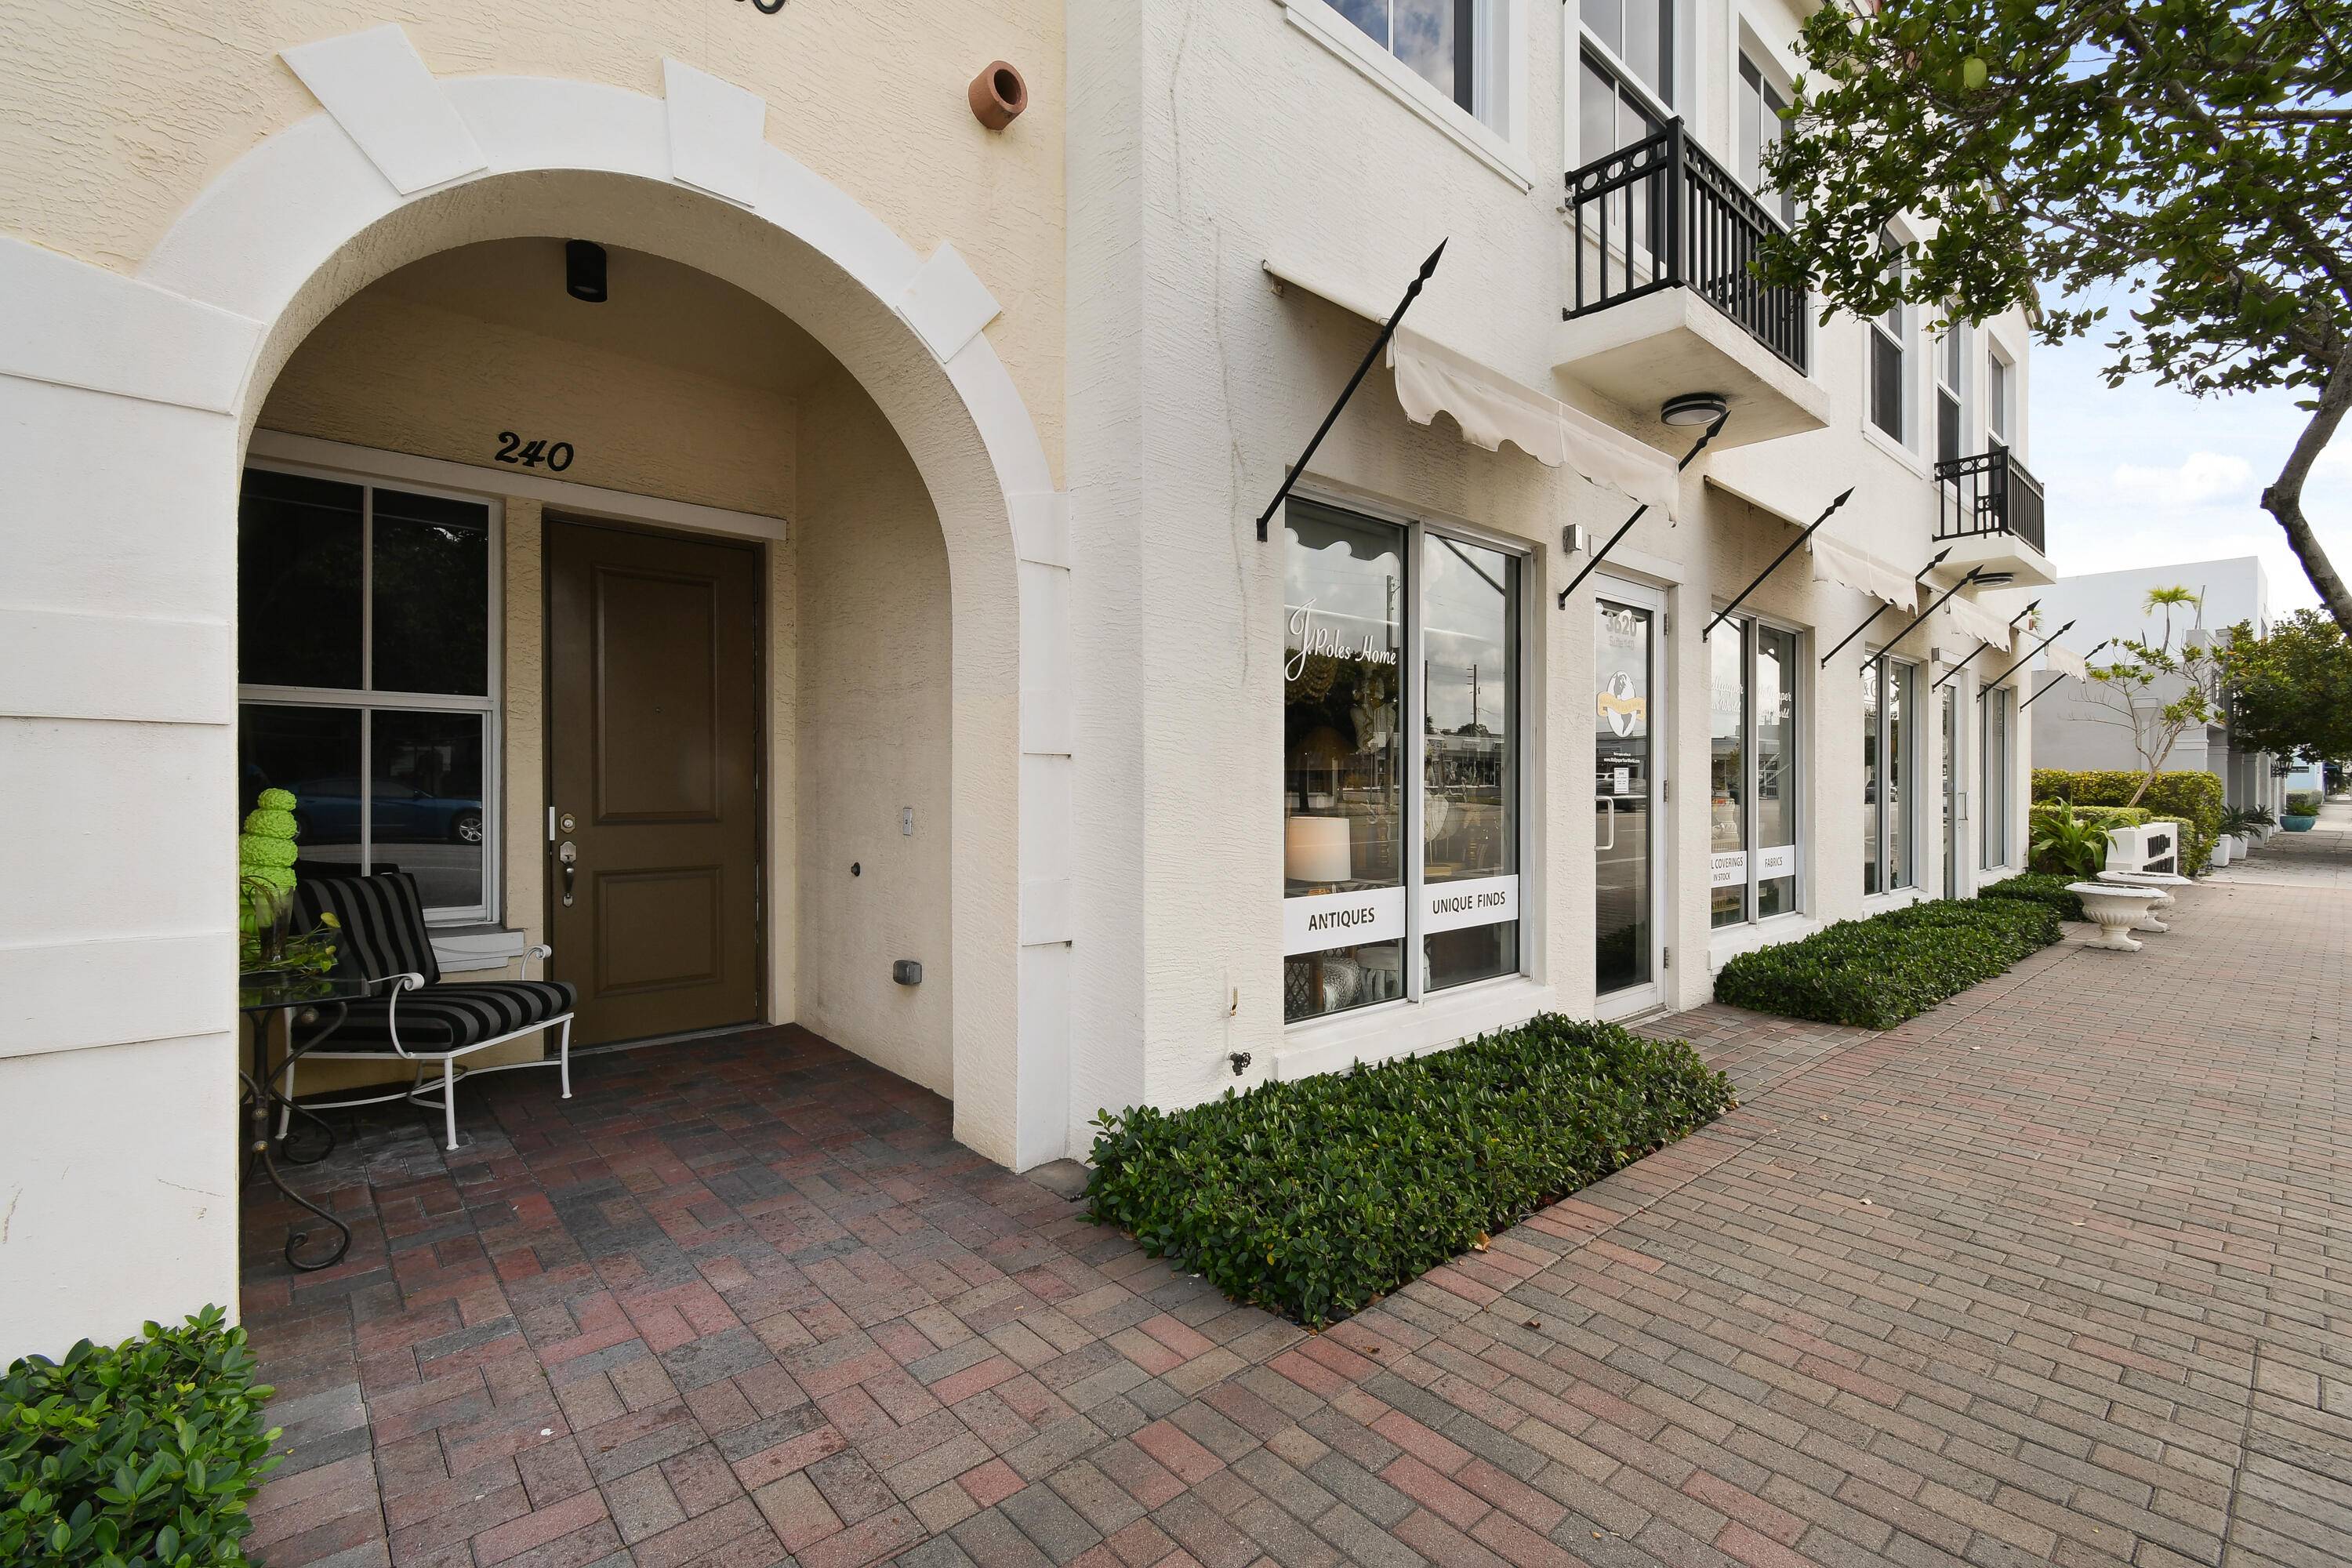 Furnished 3 bedroom 2bath townhome located in the Villas on Antique Row.